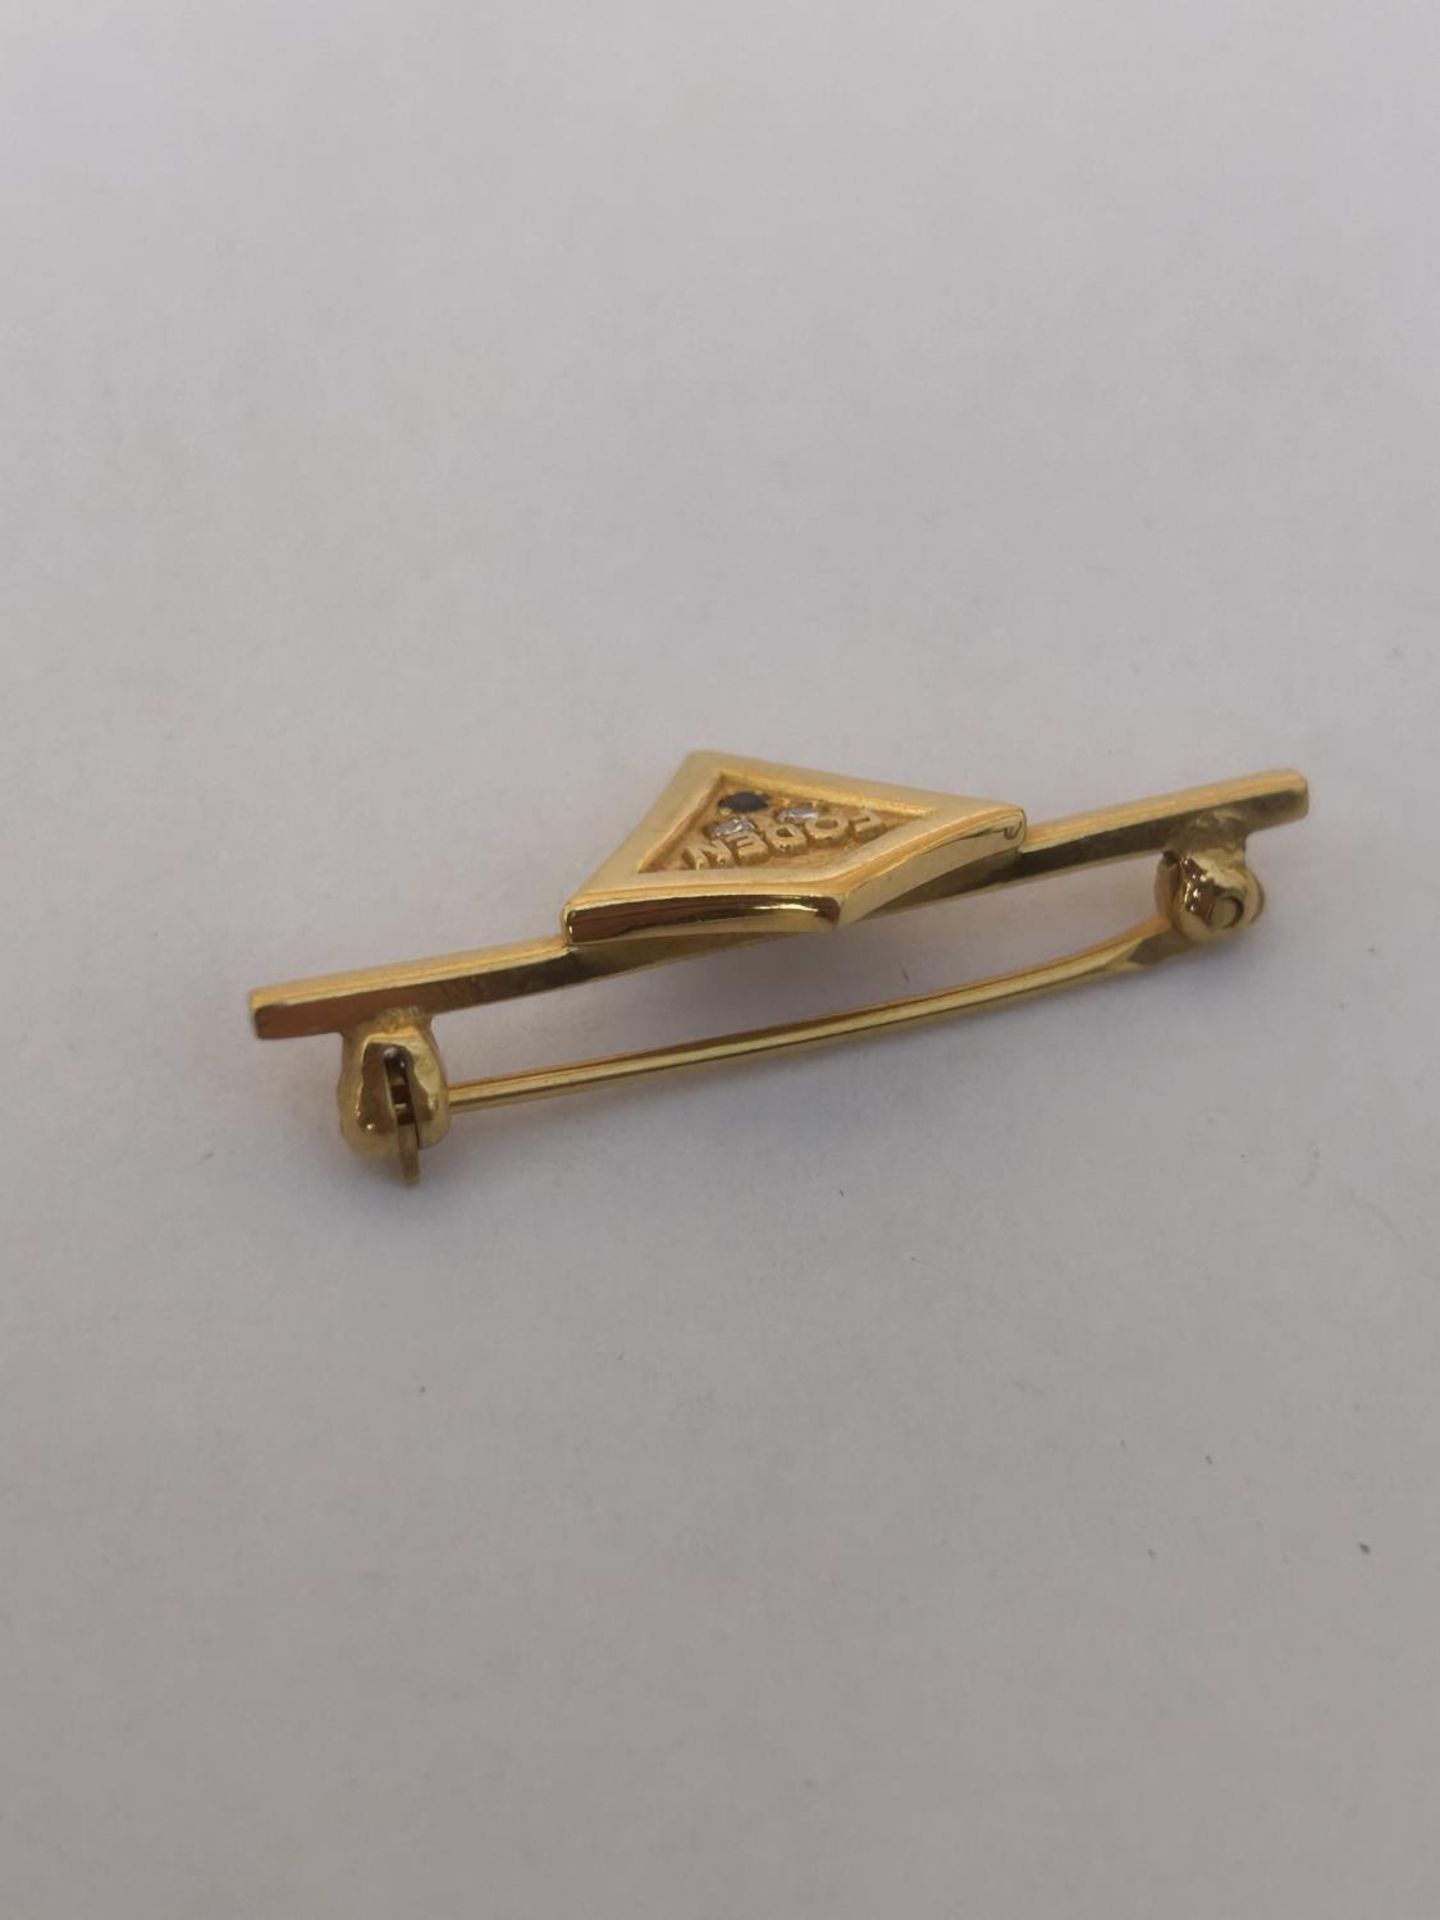 A HALLMARKED 9CT GOLD DIAMOND AND SAPPHIRE FODEN TRUCKS LAPEL BADGE WEIGHT 3.37 G - Image 4 of 4